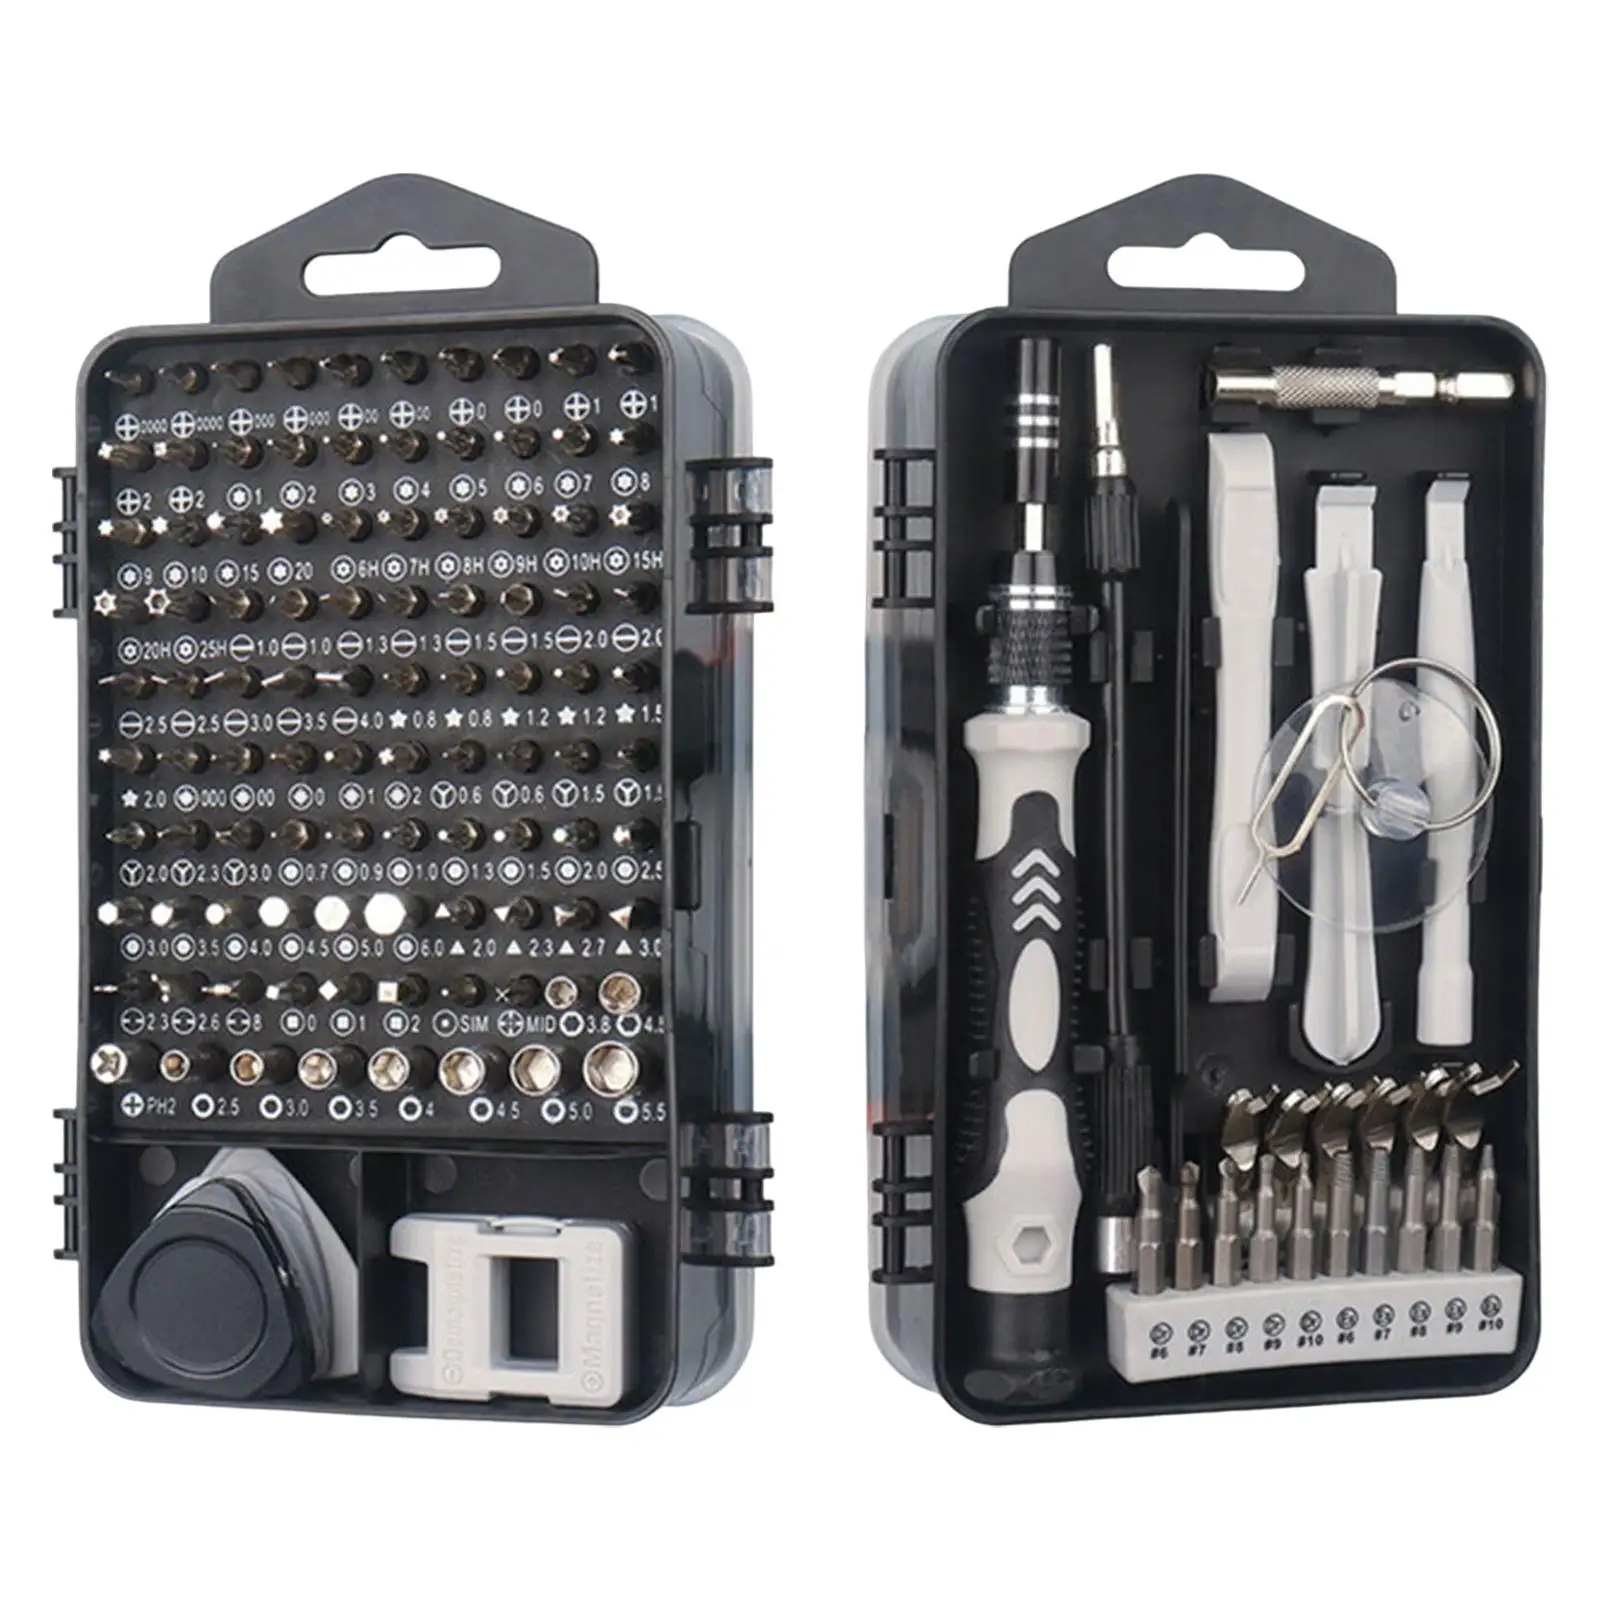 135Pcs Multifunction Hand Tool Precision Screwdriver Set Electronic Repair Tool Kit for Cellphone PC Game Console Watch Phone